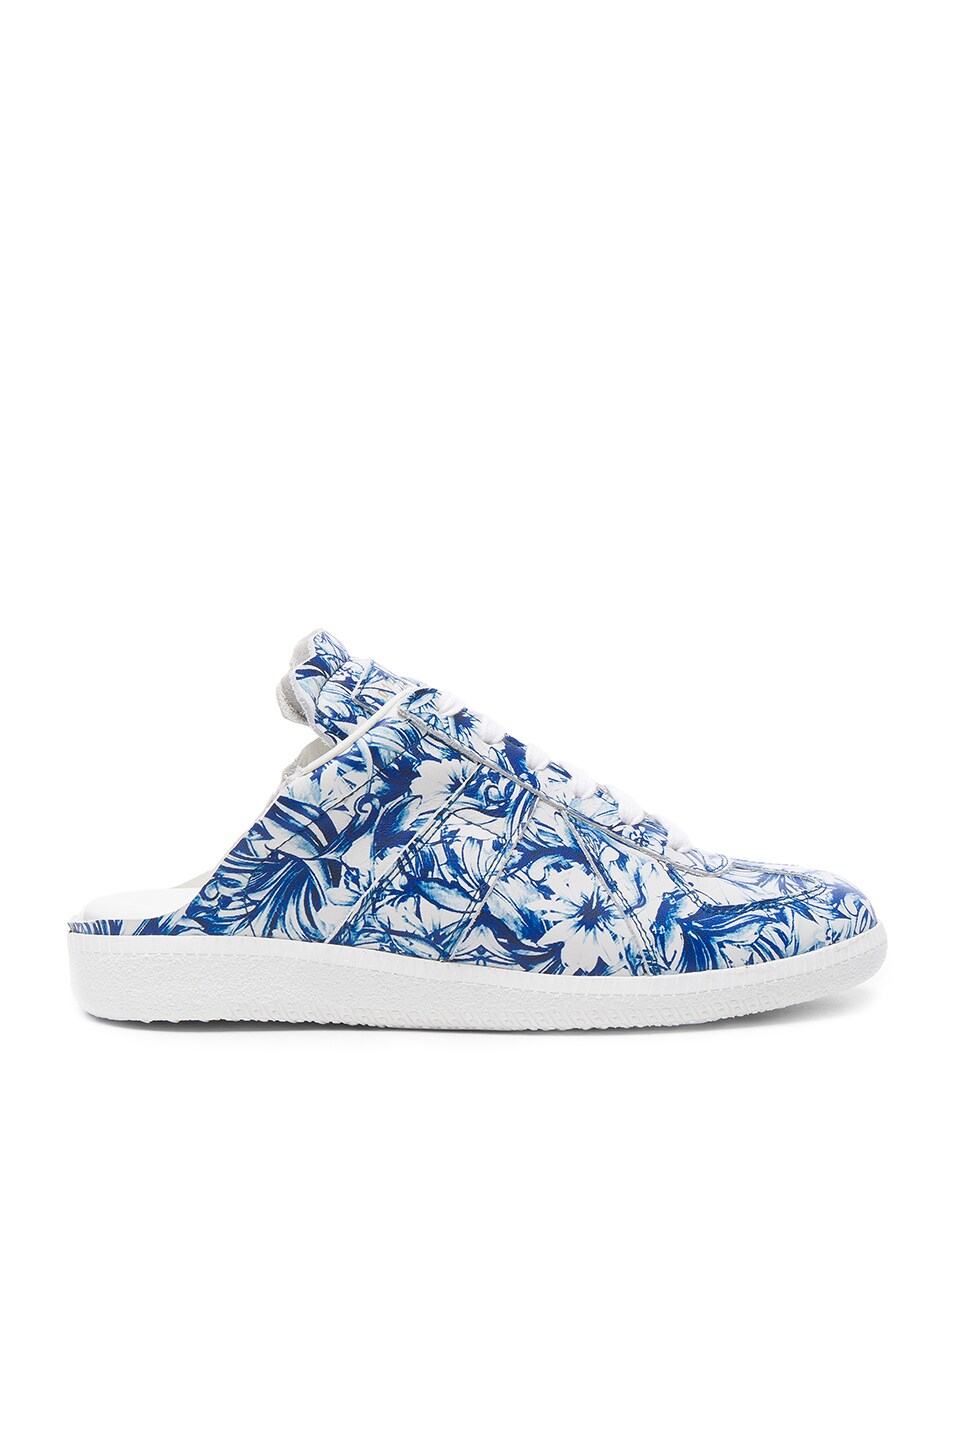 Image 1 of Maison Margiela Printed Leather Sneakers in Unique Variant